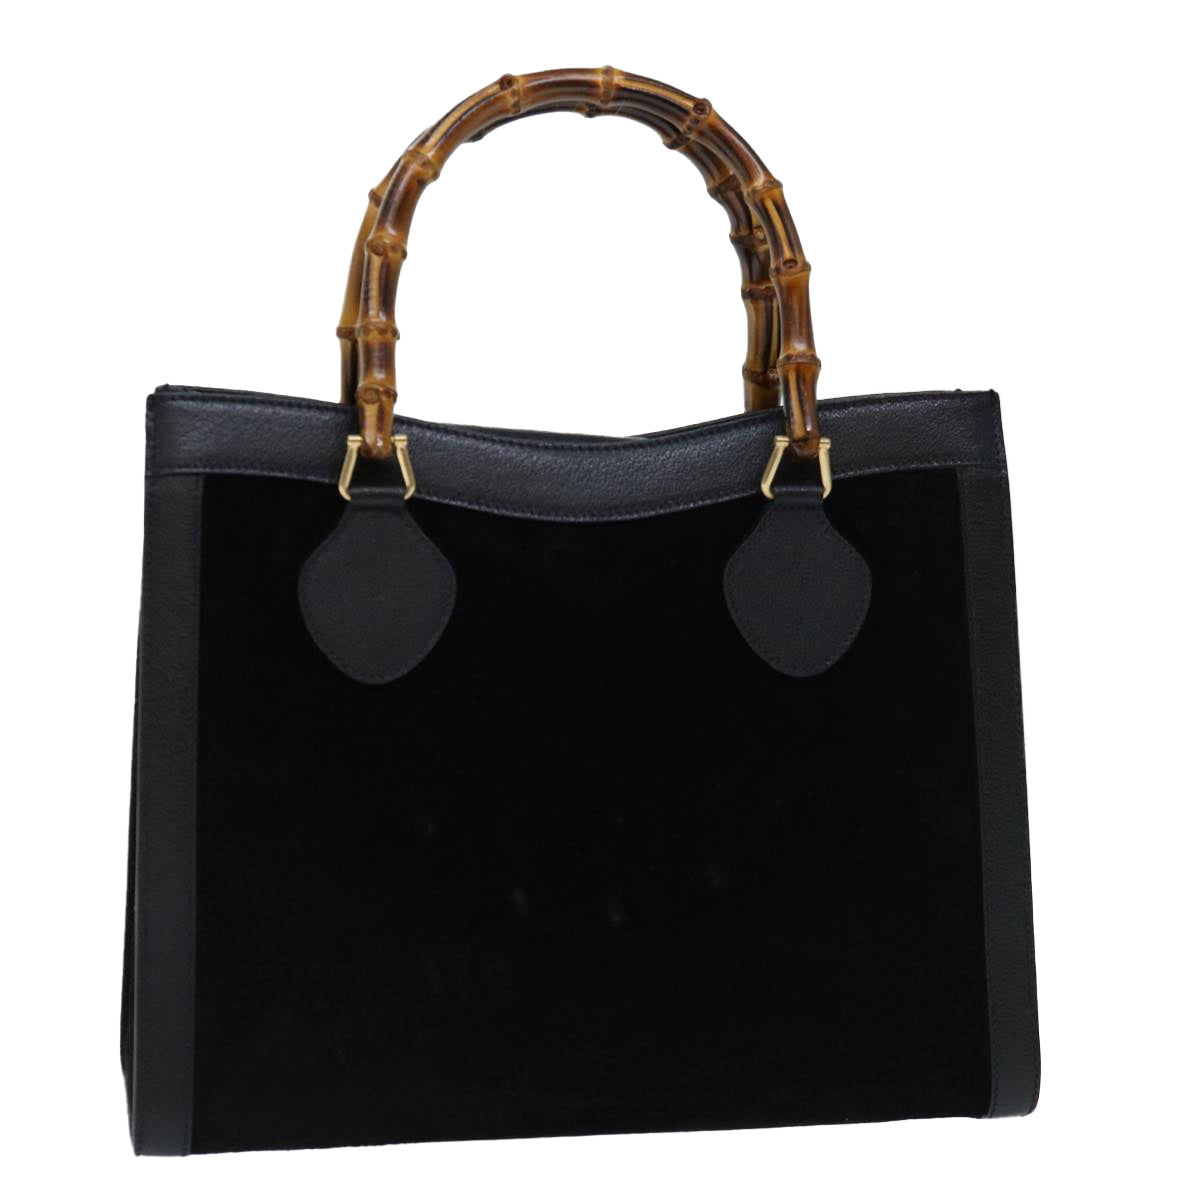 GUCCI Bamboo Tote Bag Suede Black 002 0260 2615 Auth 70189